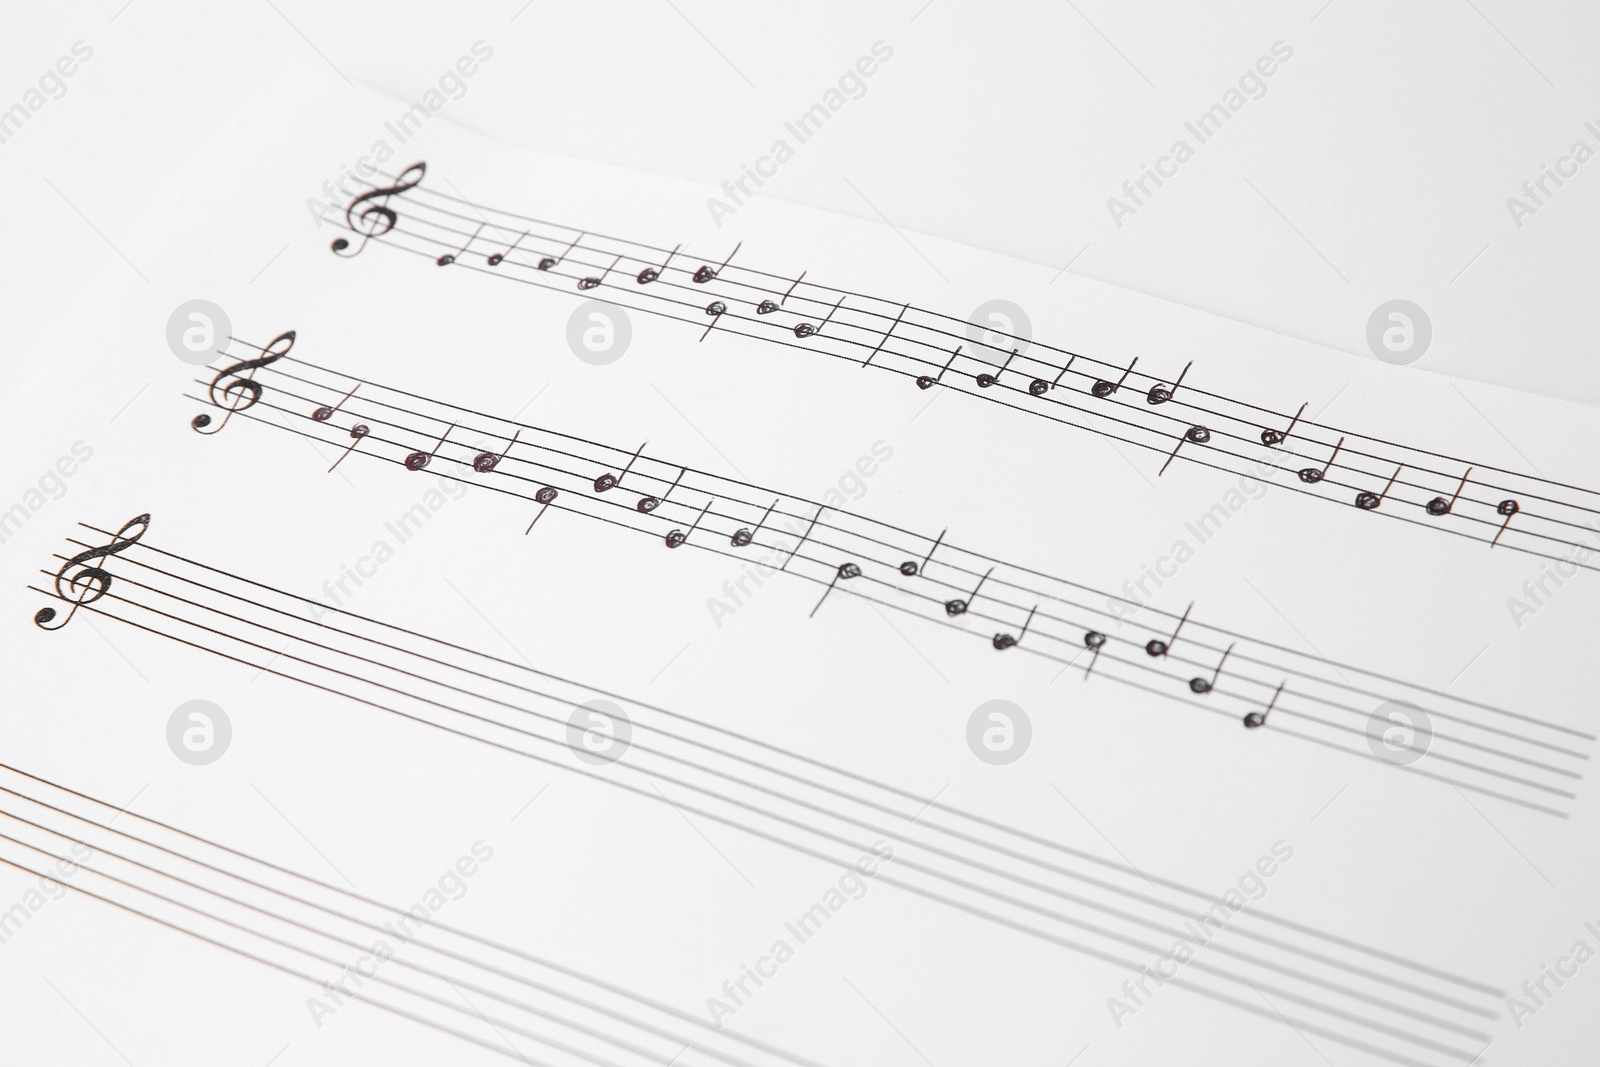 Photo of Sheet of paper with music notes on white background, closeup view